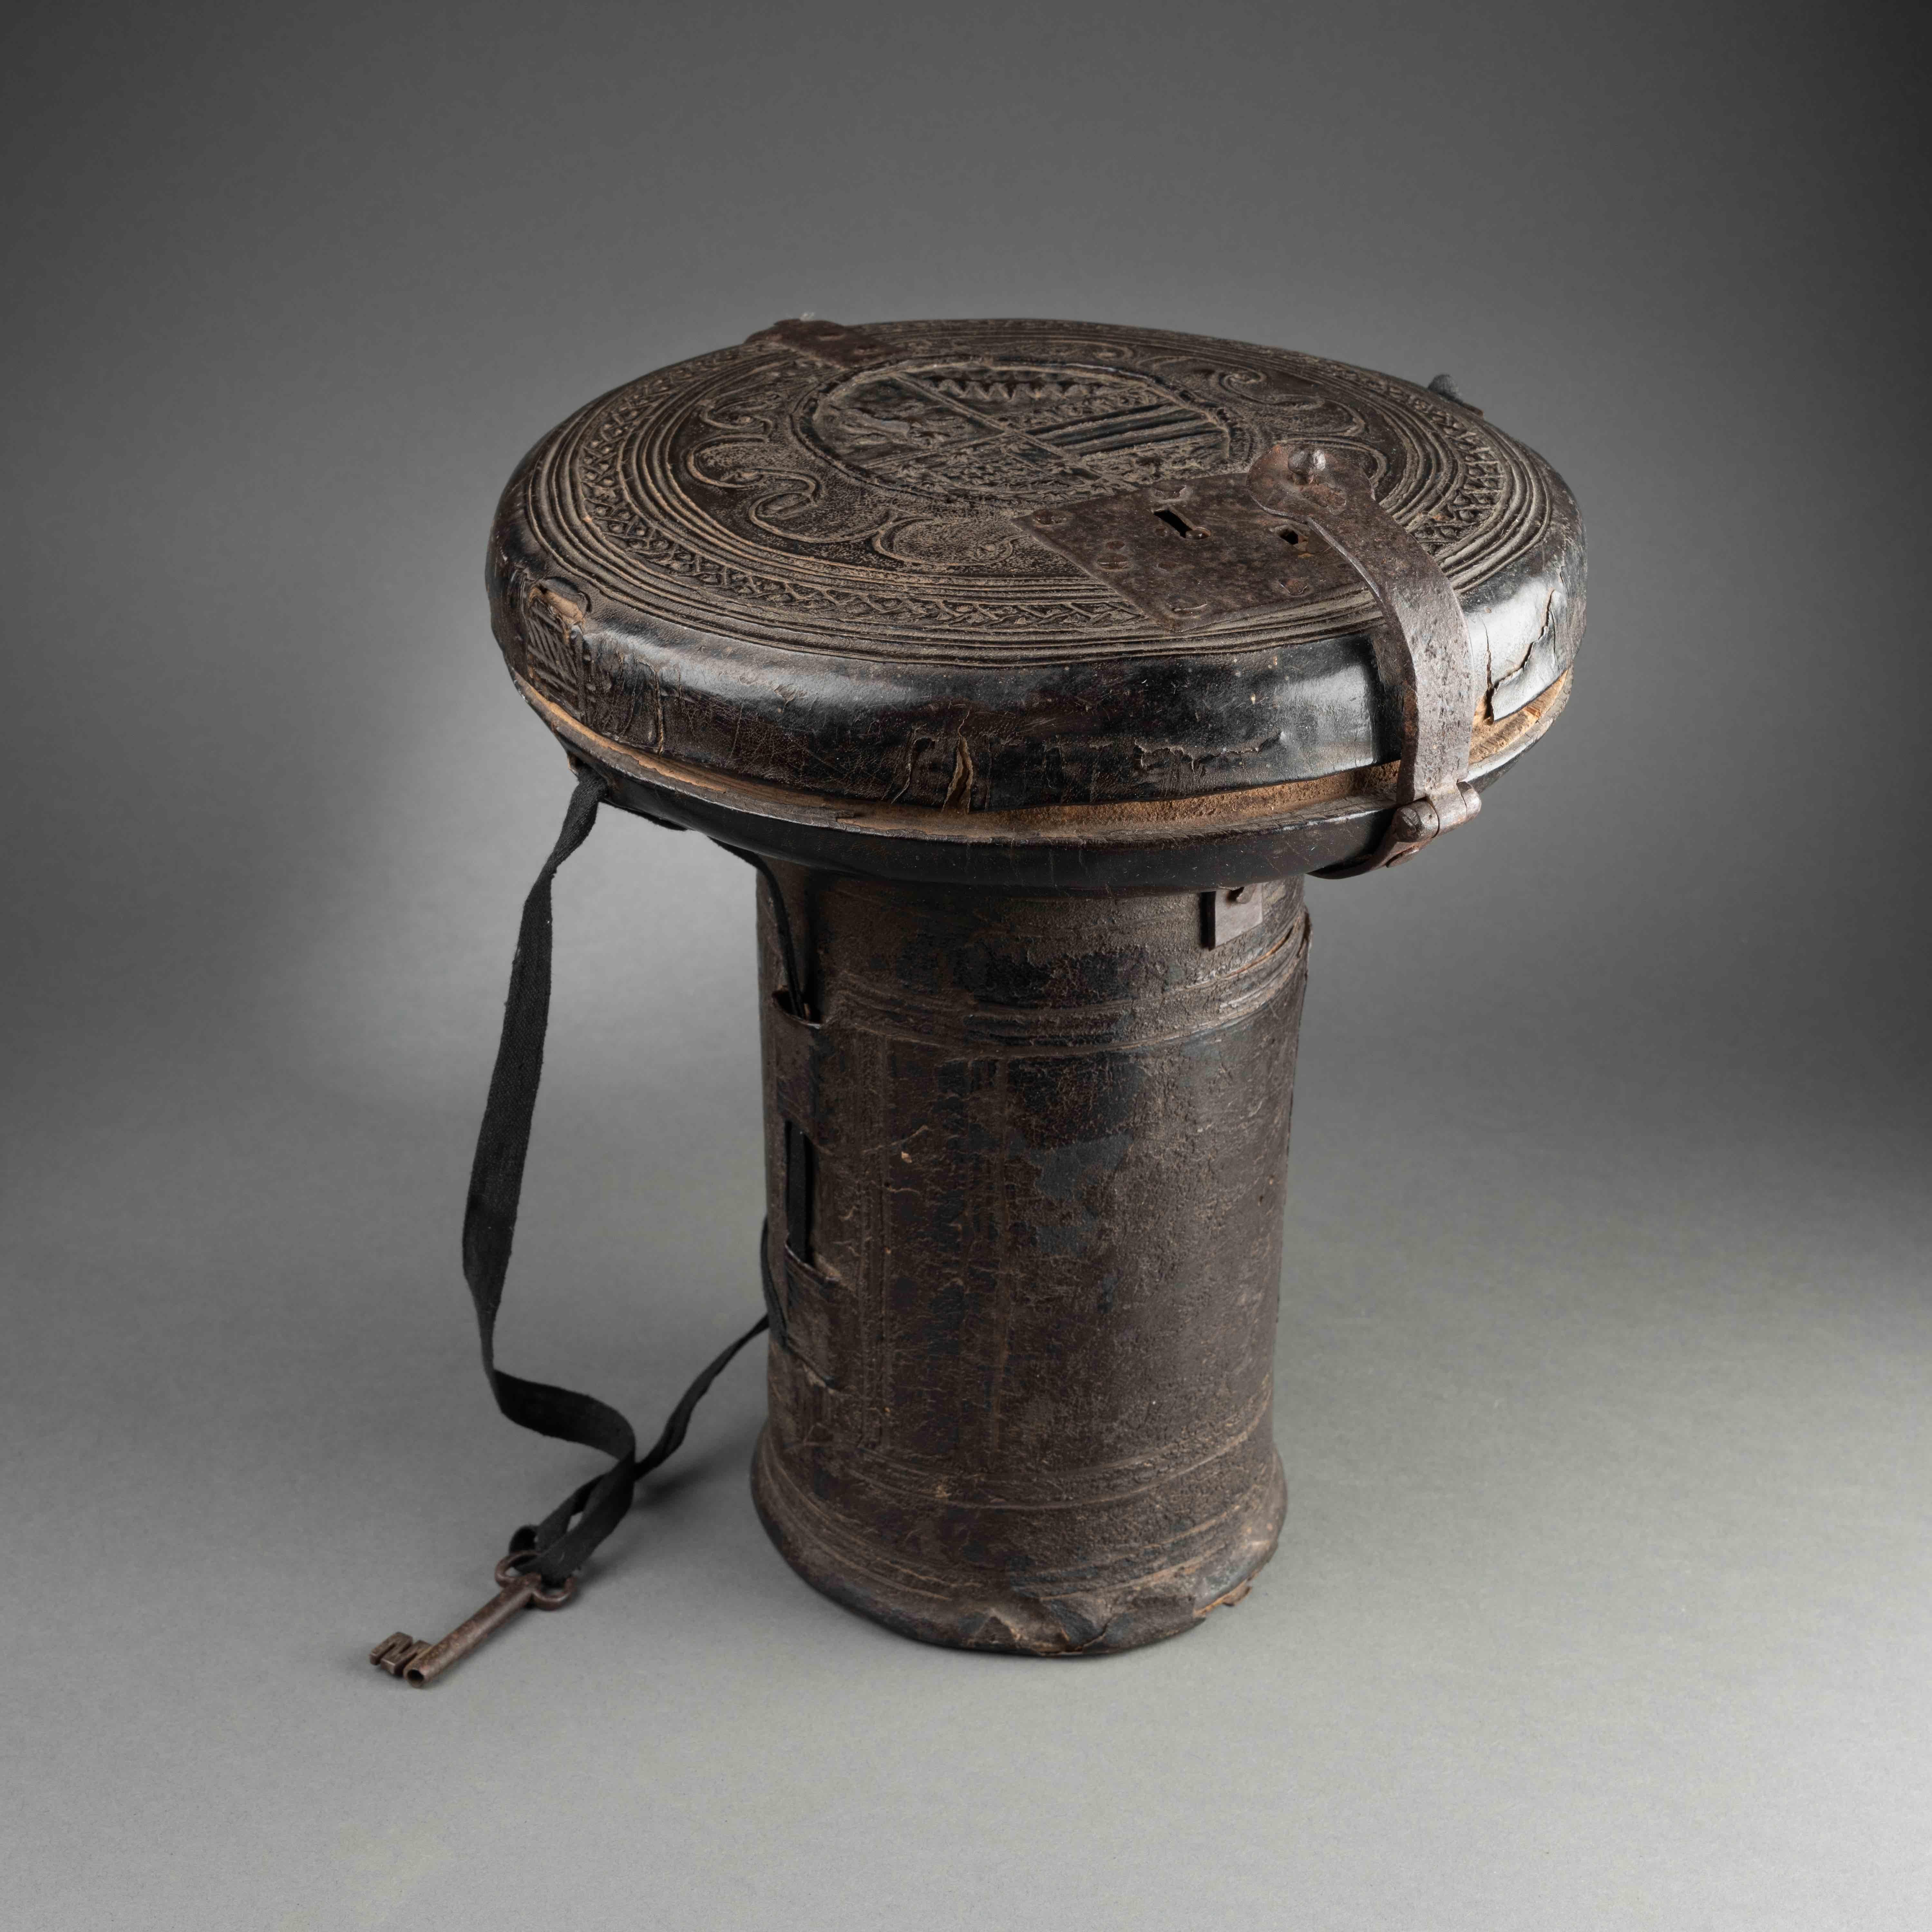 Florentine leather casket
Italy, Tuscany 
16th century
leather, iron and wood.


Very rare boiled leather box incised on a wooden core; iron lock.
The central shield is divided into 4 equal sections by a quartered cross and inscribed in a